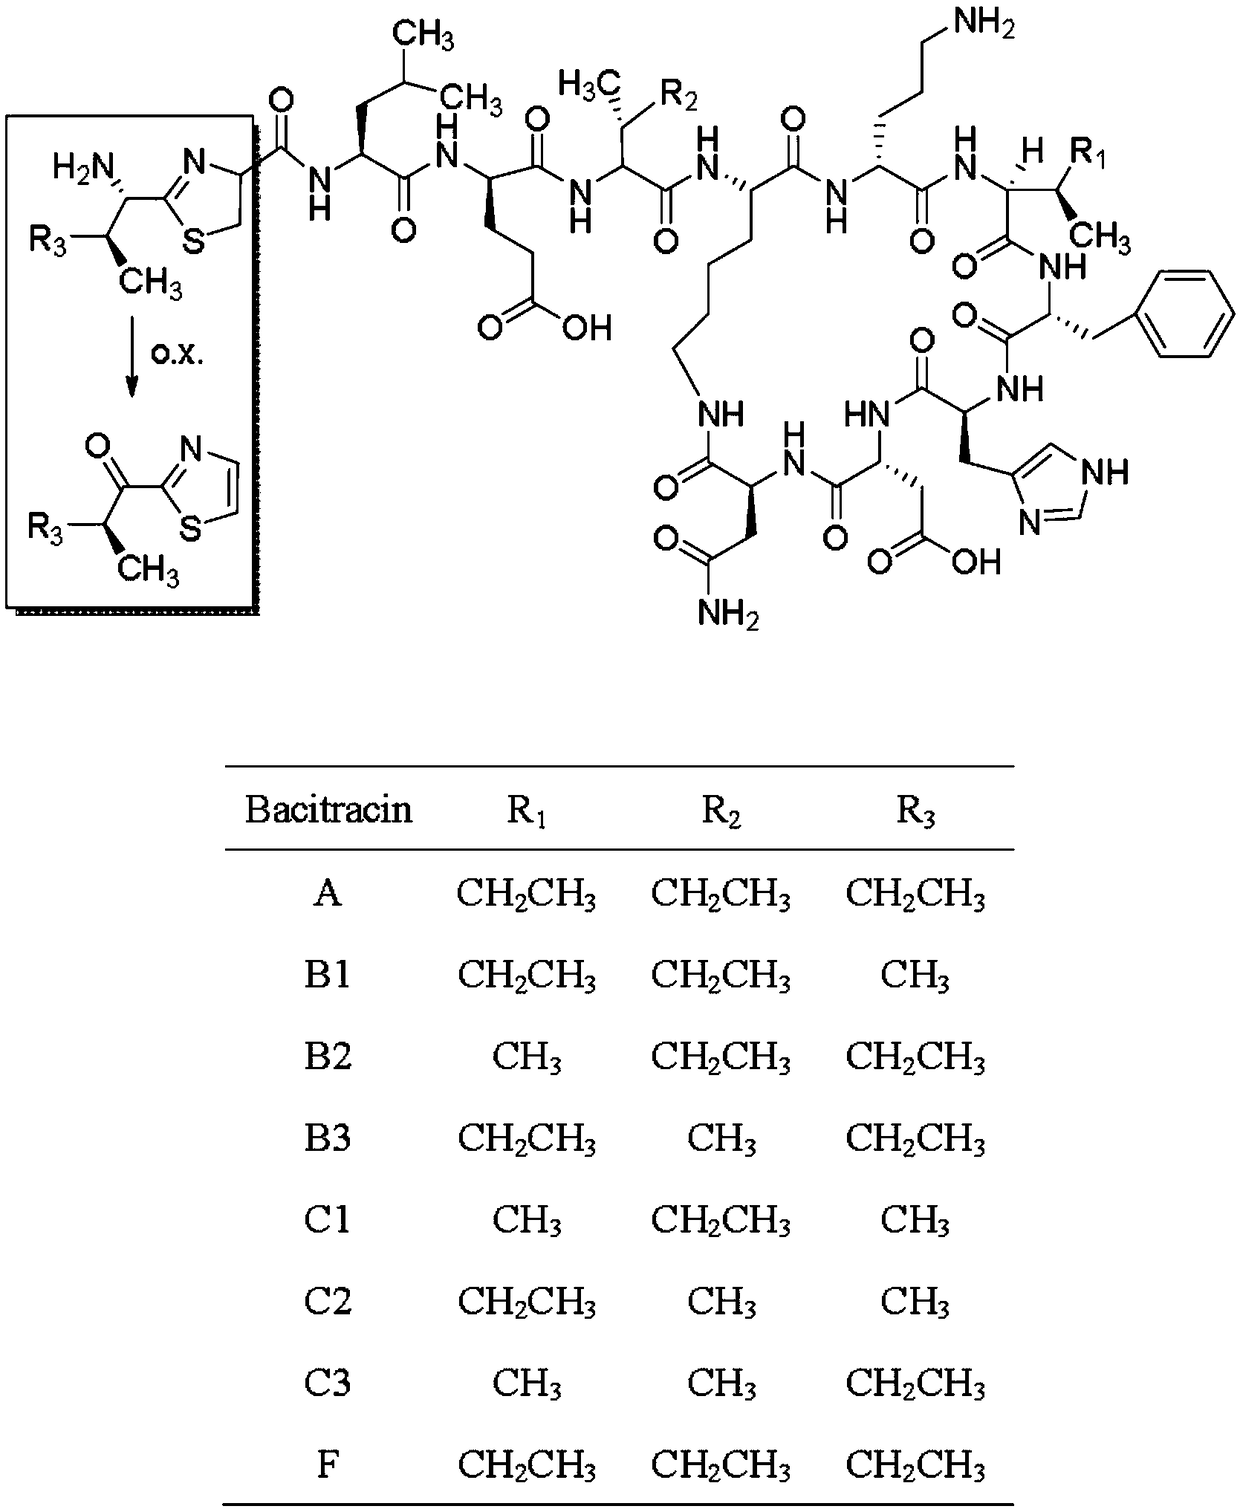 High performance liquid chromatography method for analyzing bacitracin components